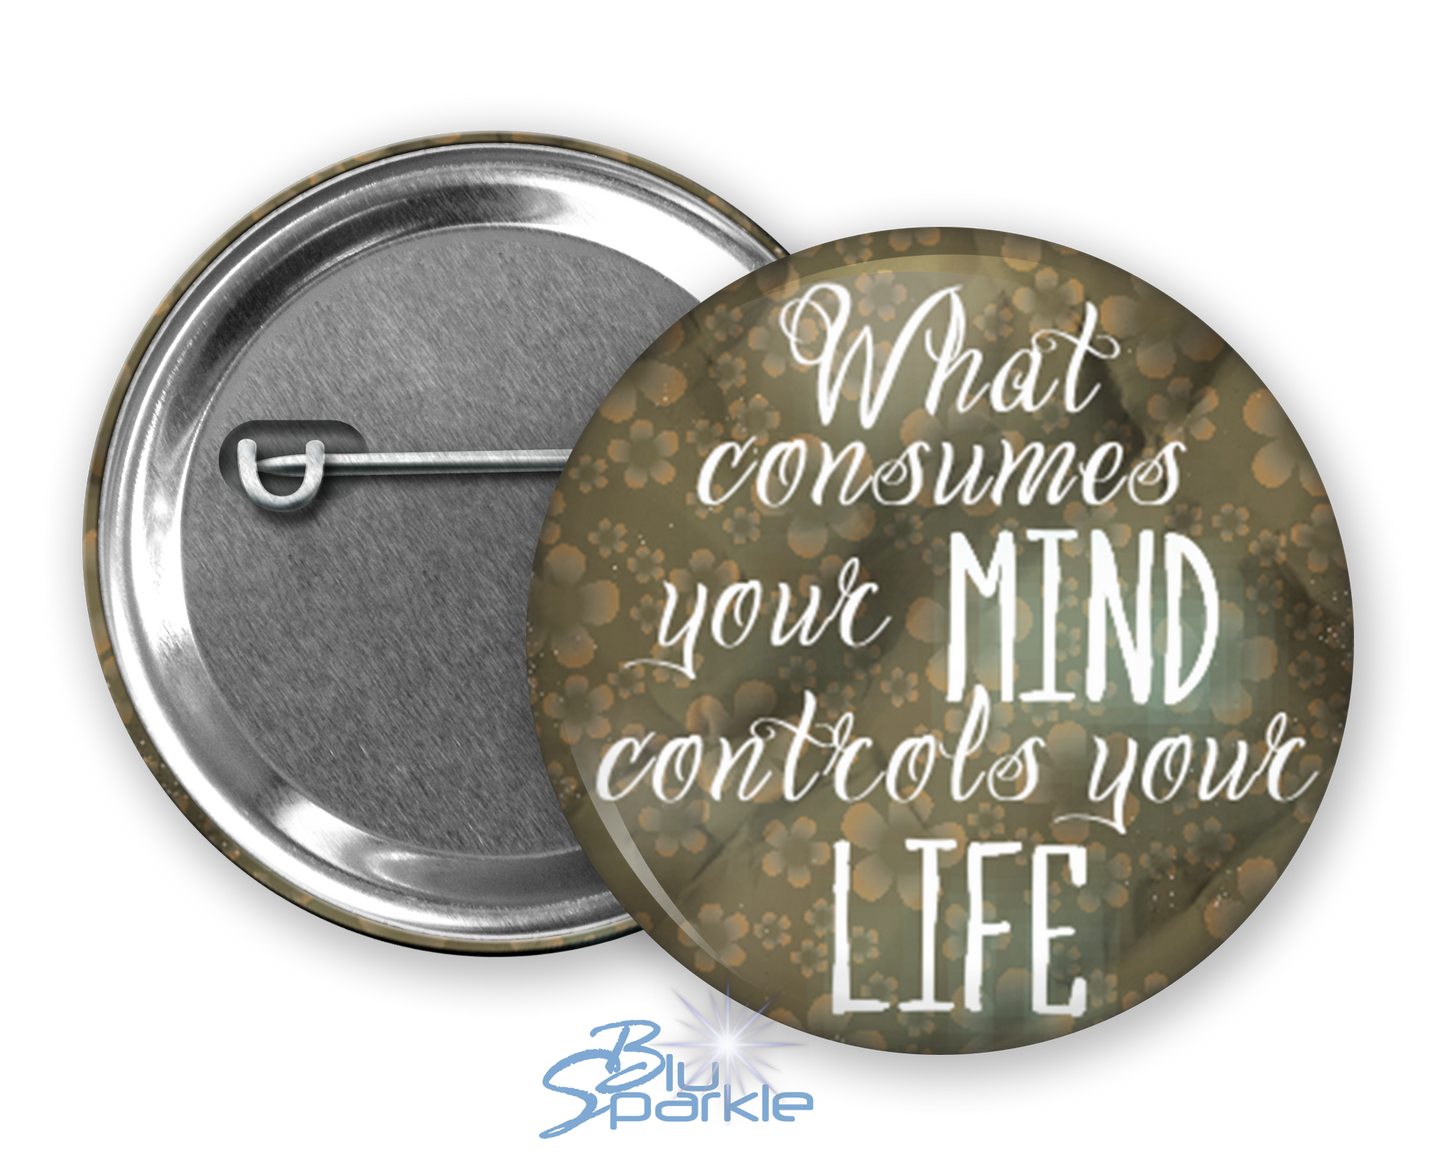 What Consumes Your MIND Controls Your LIFE - Pinback Buttons